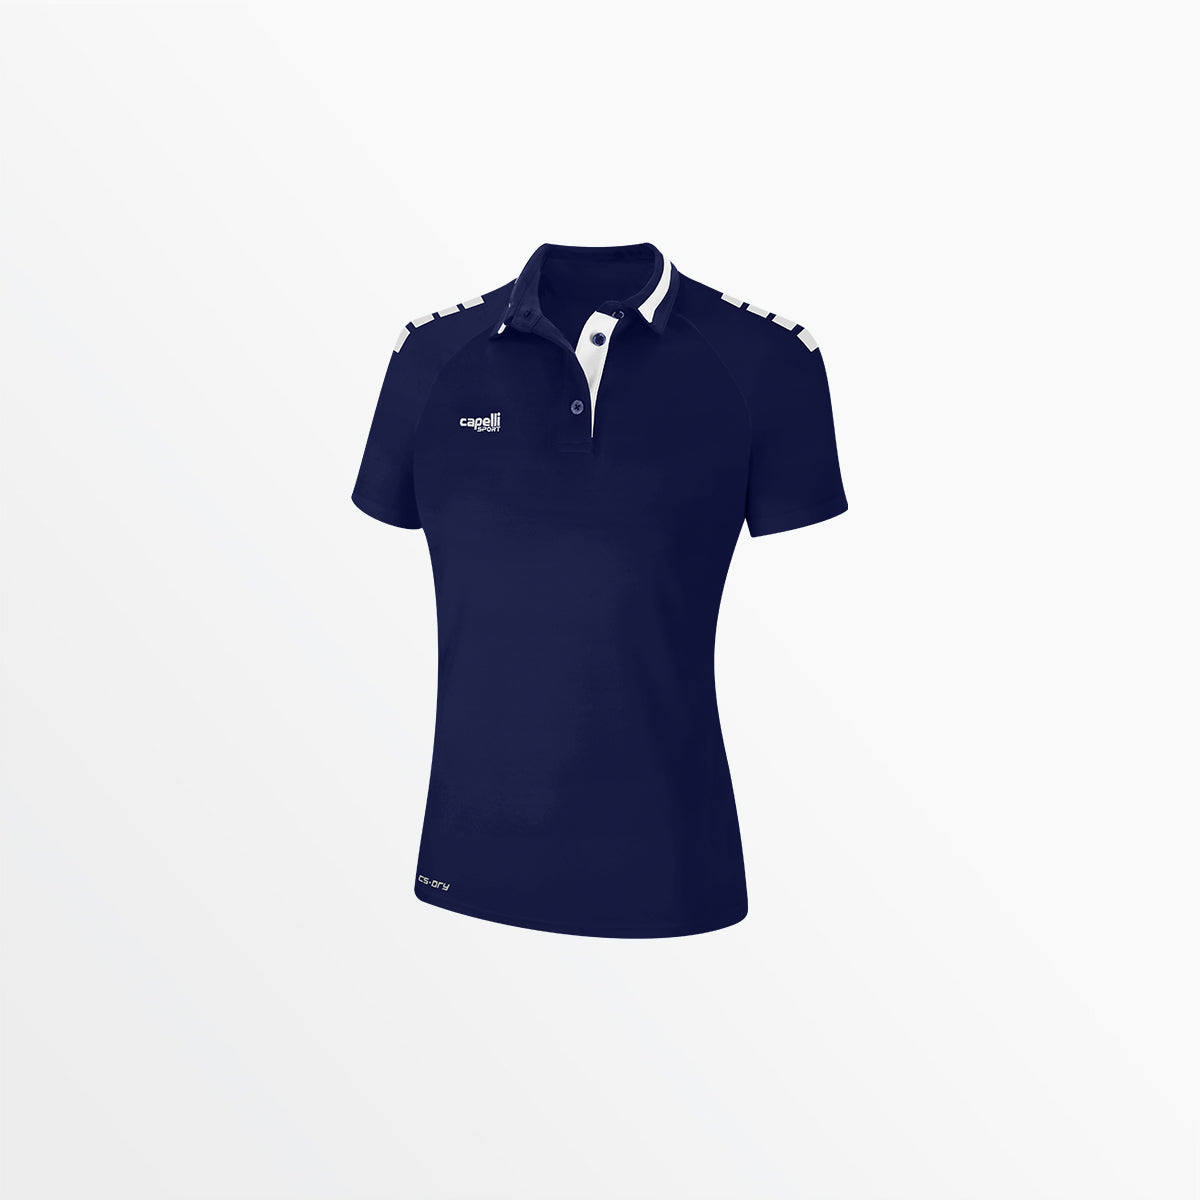 WOMEN'S UPTOWN POLY POLO